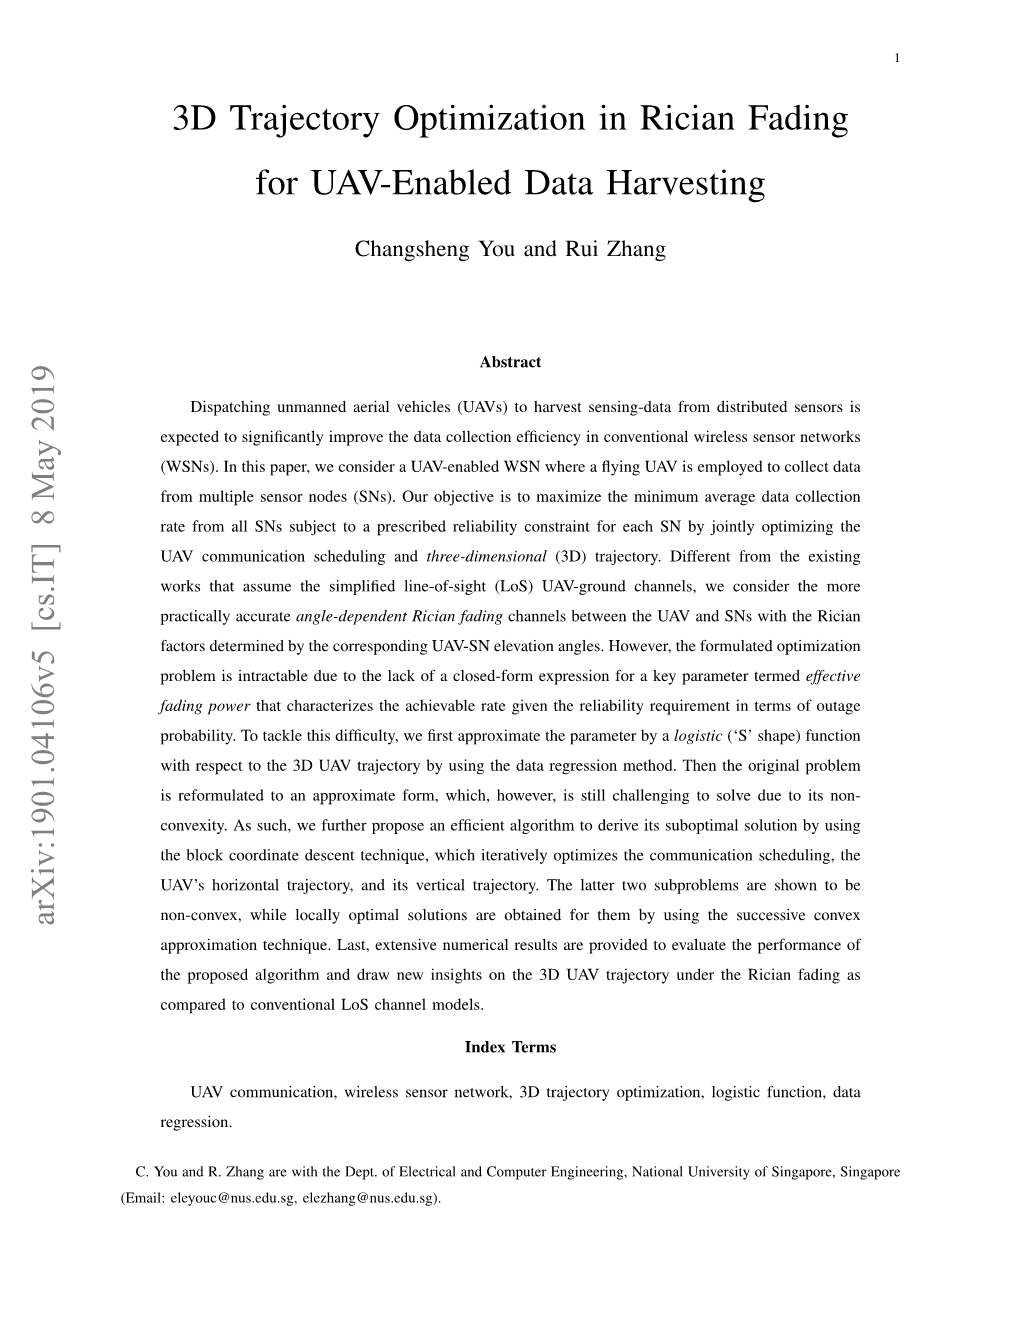 3D Trajectory Optimization in Rician Fading for UAV-Enabled Data Harvesting